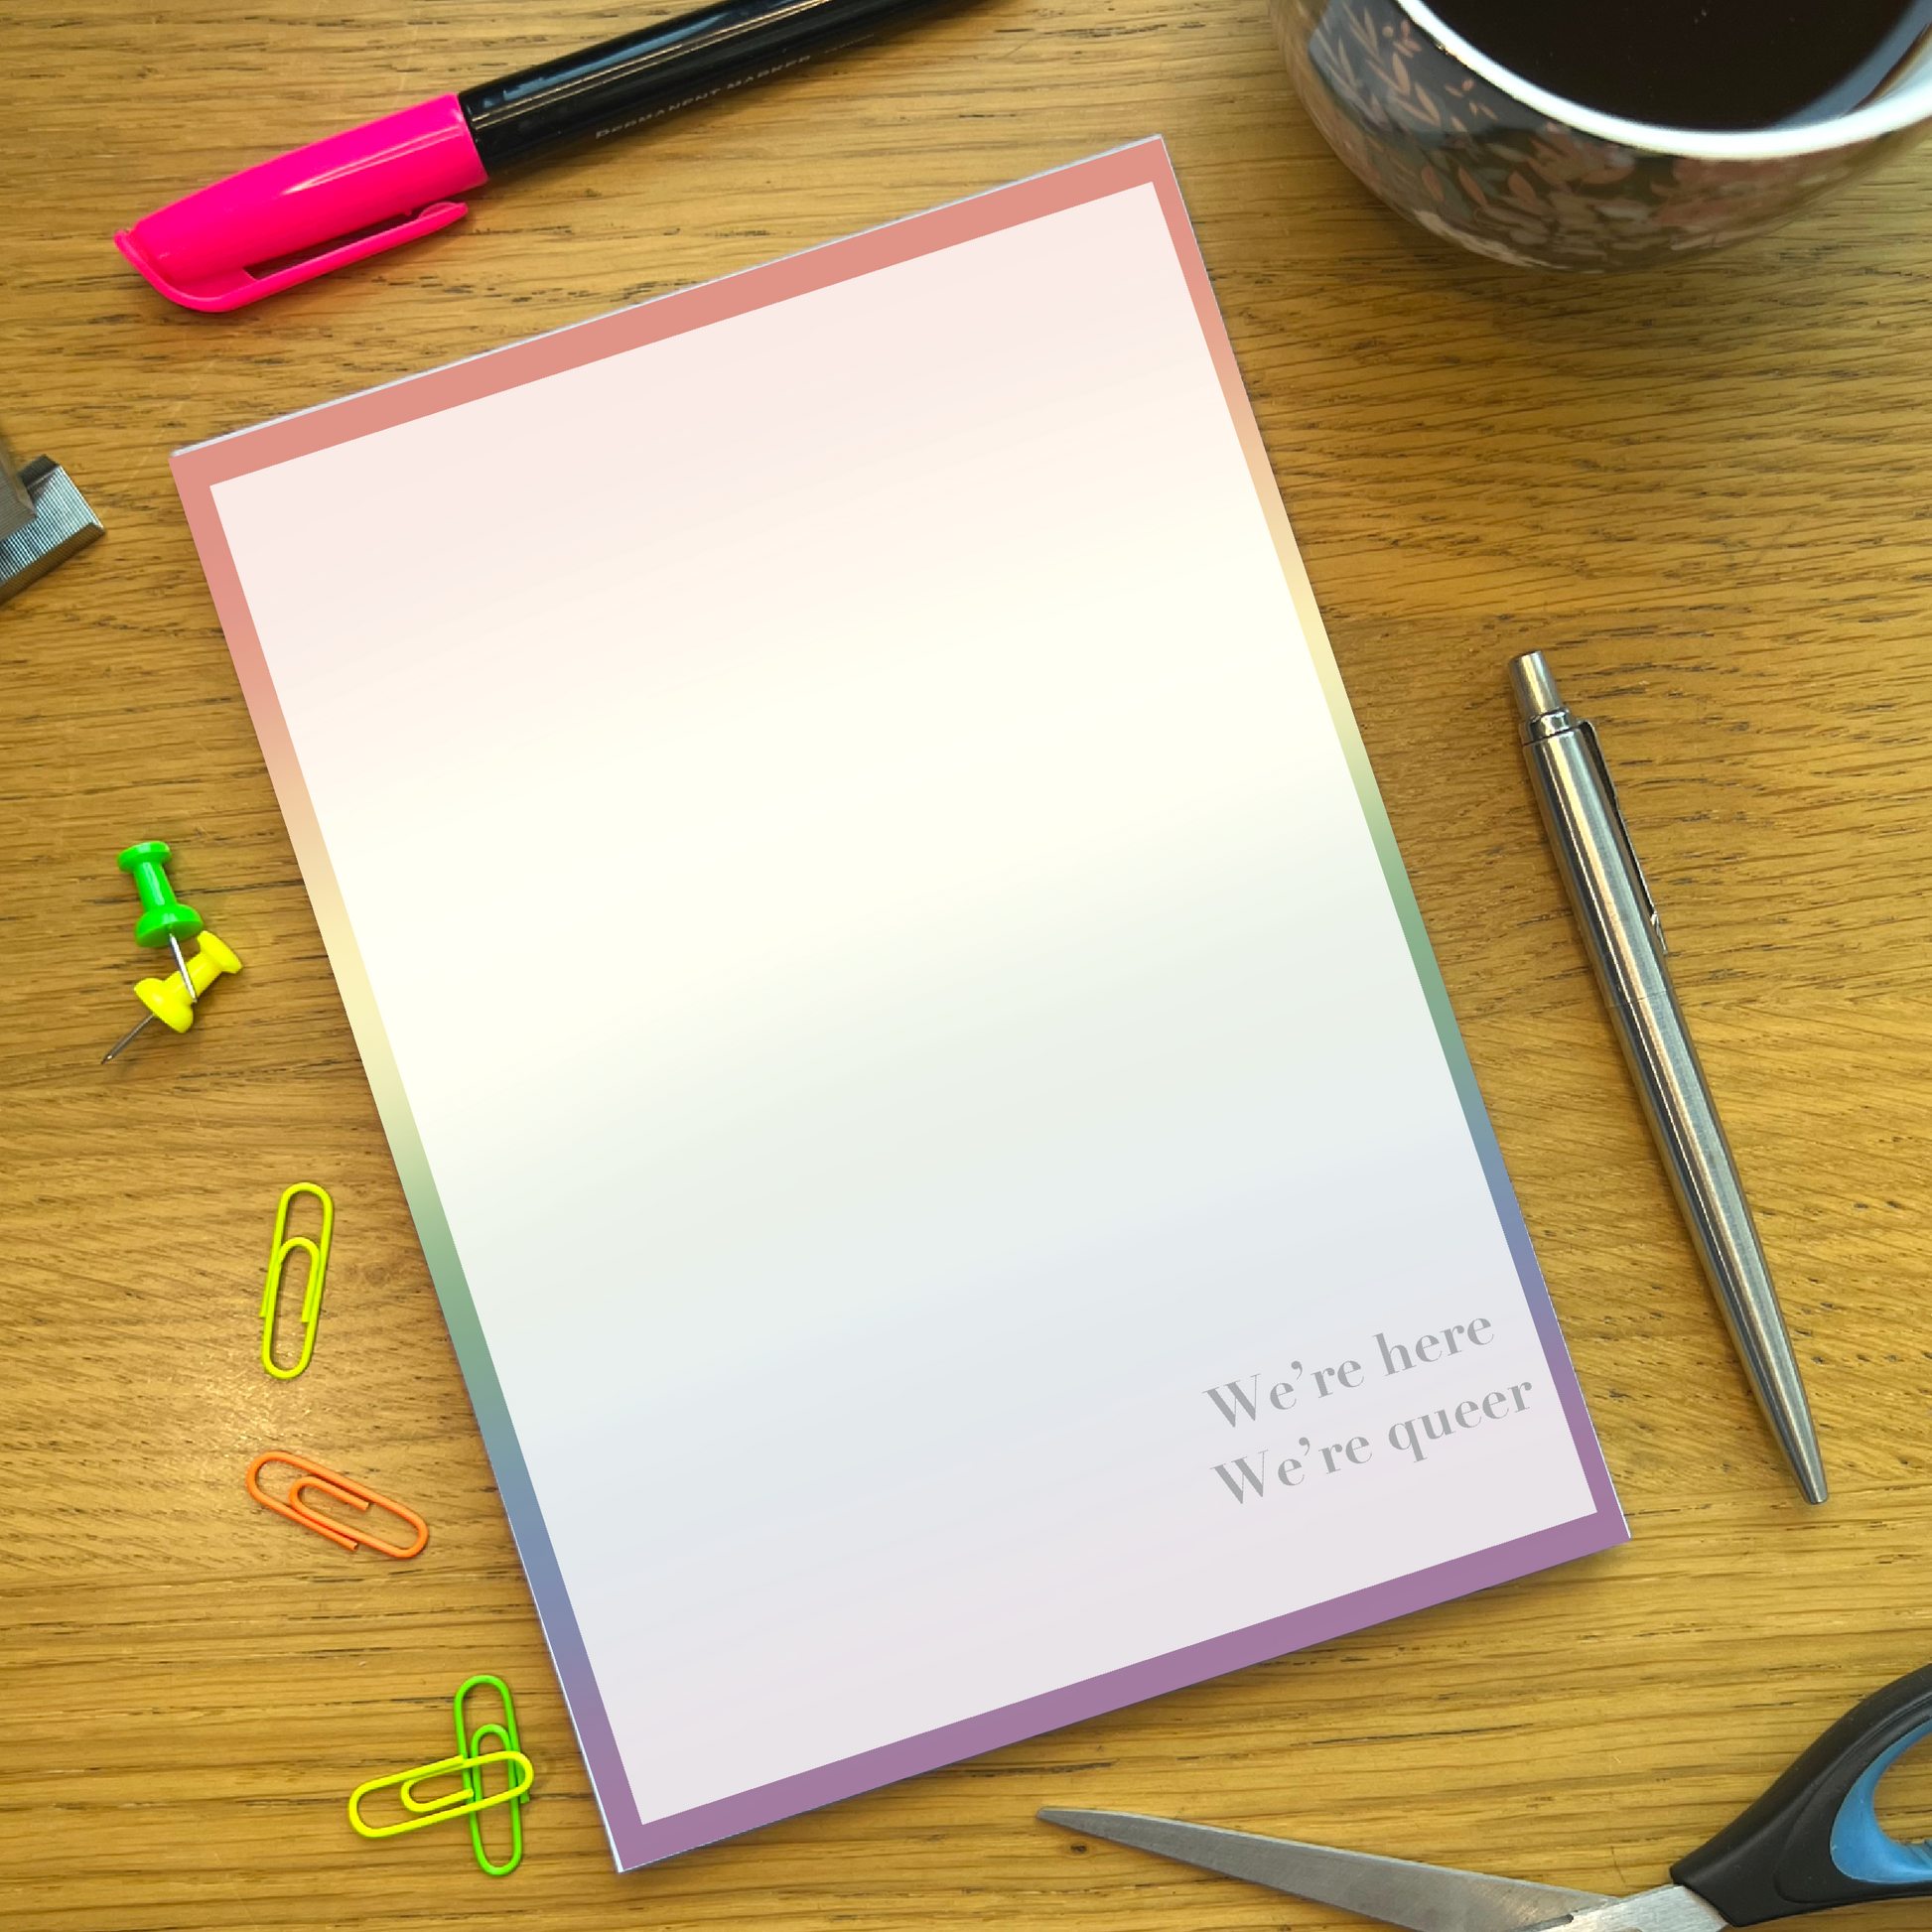 Rainbow pride notepad with quote We’re Here, We’re Queer, on a wooden desk with stationery